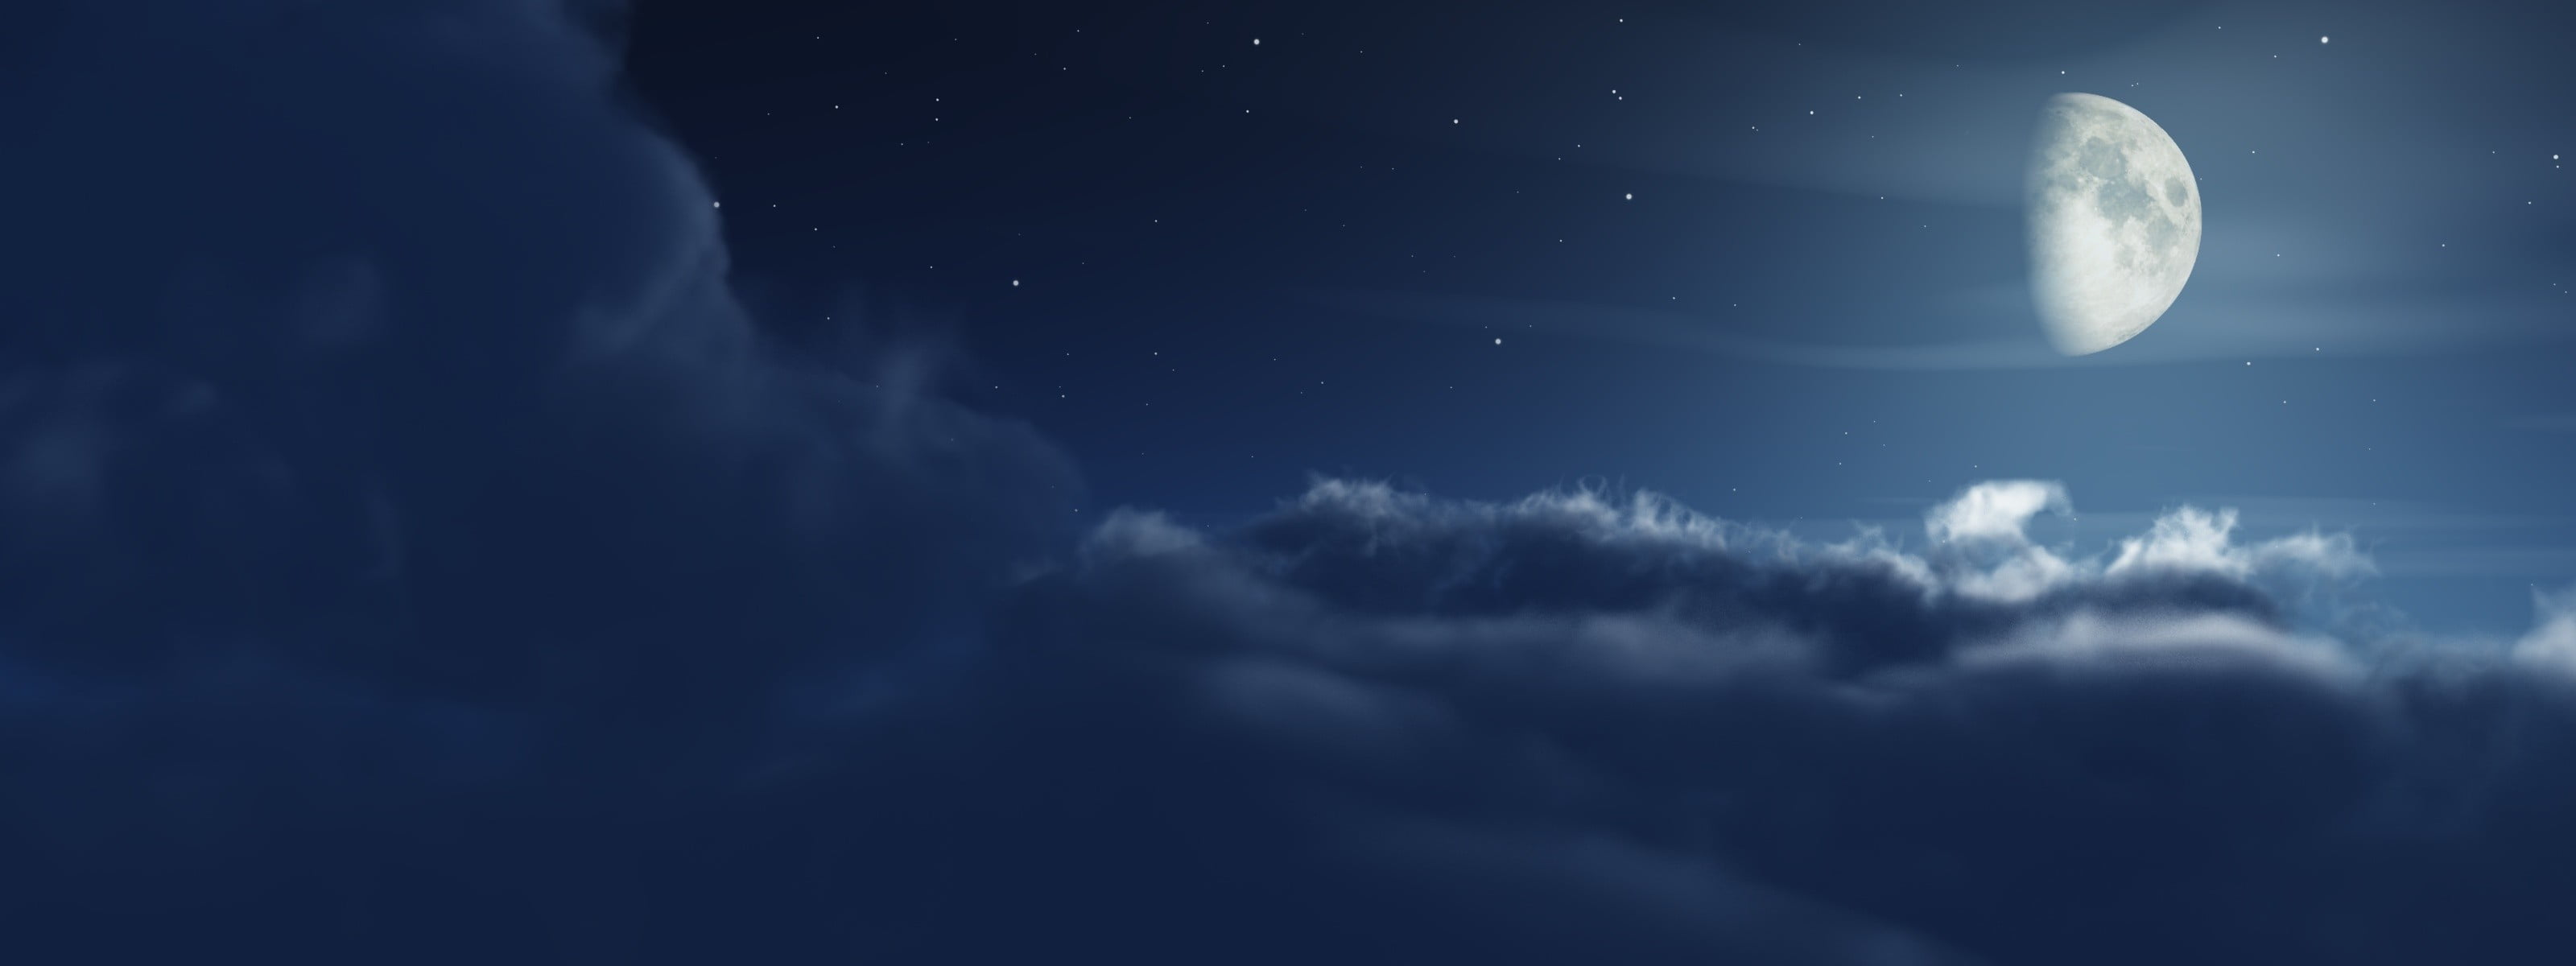 moon and clouds wallpaper, night, Moon, sky, clouds